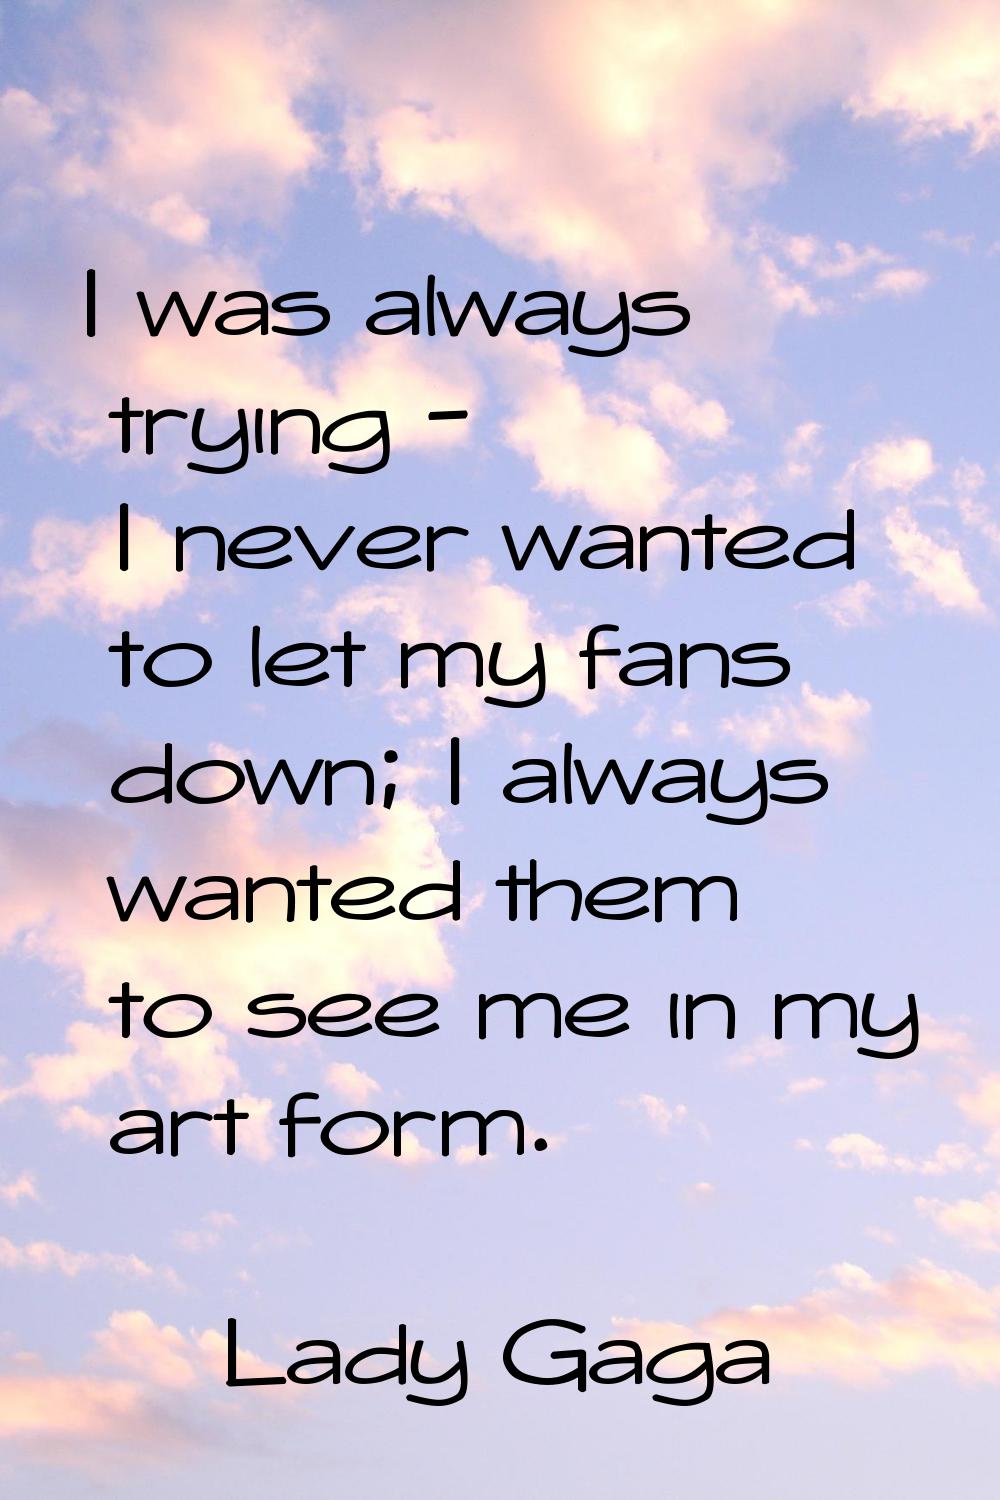 I was always trying - I never wanted to let my fans down; I always wanted them to see me in my art 